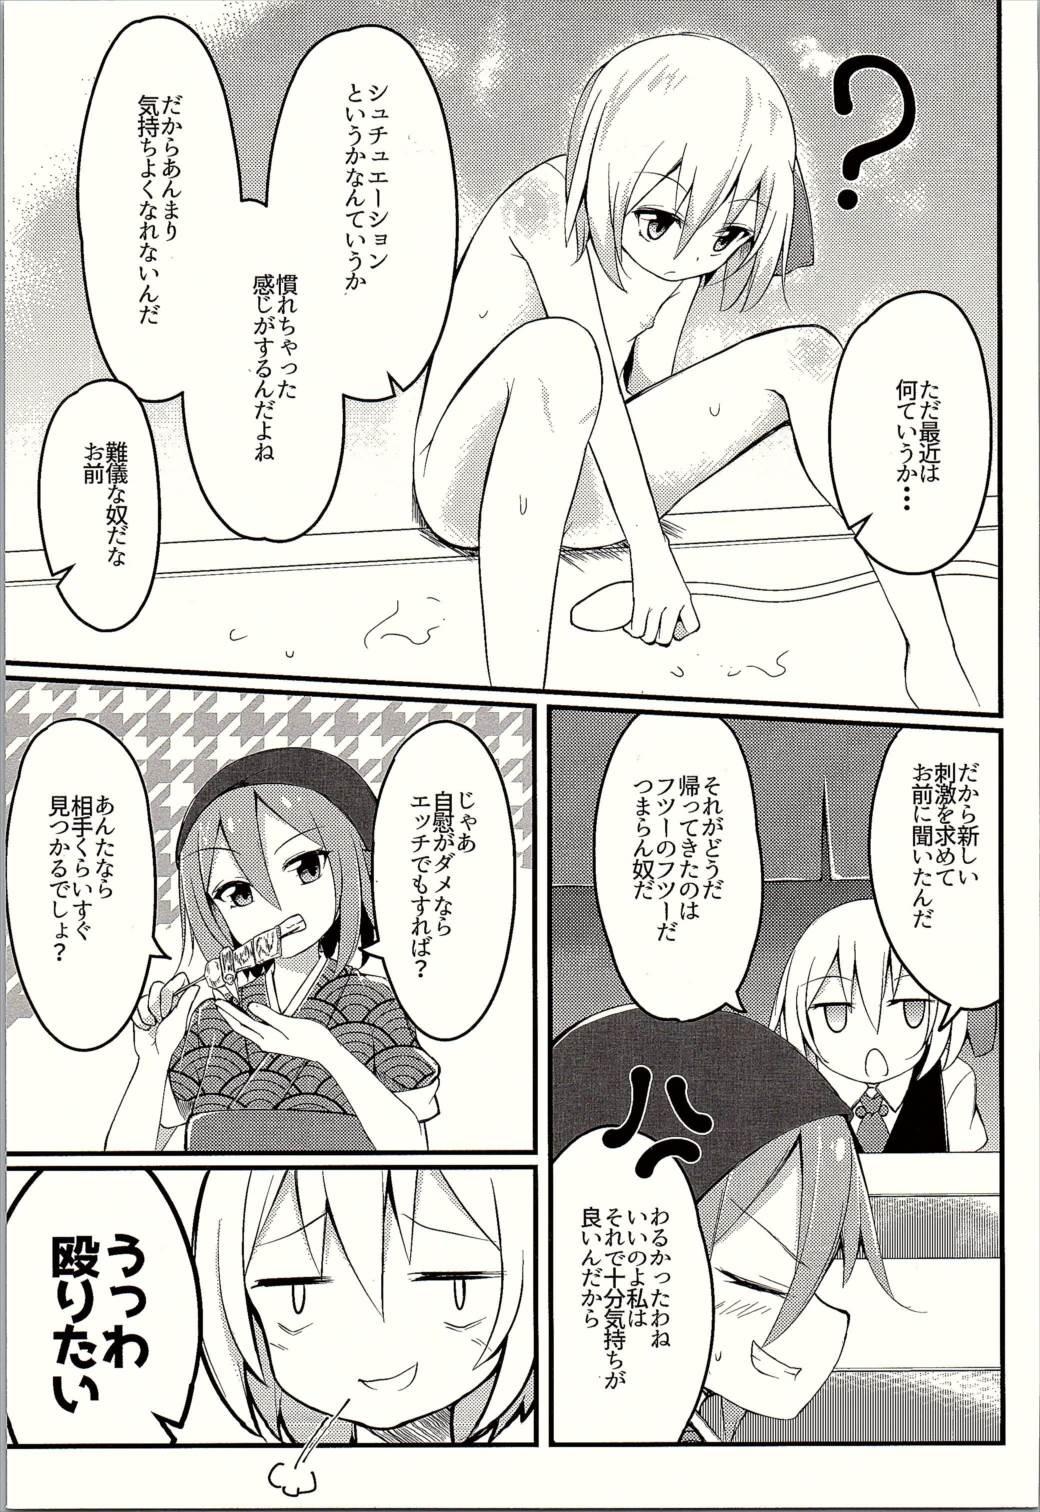 Old Vs Young Muramura! Rumia-chan V - Touhou project Hot Pussy - Page 8